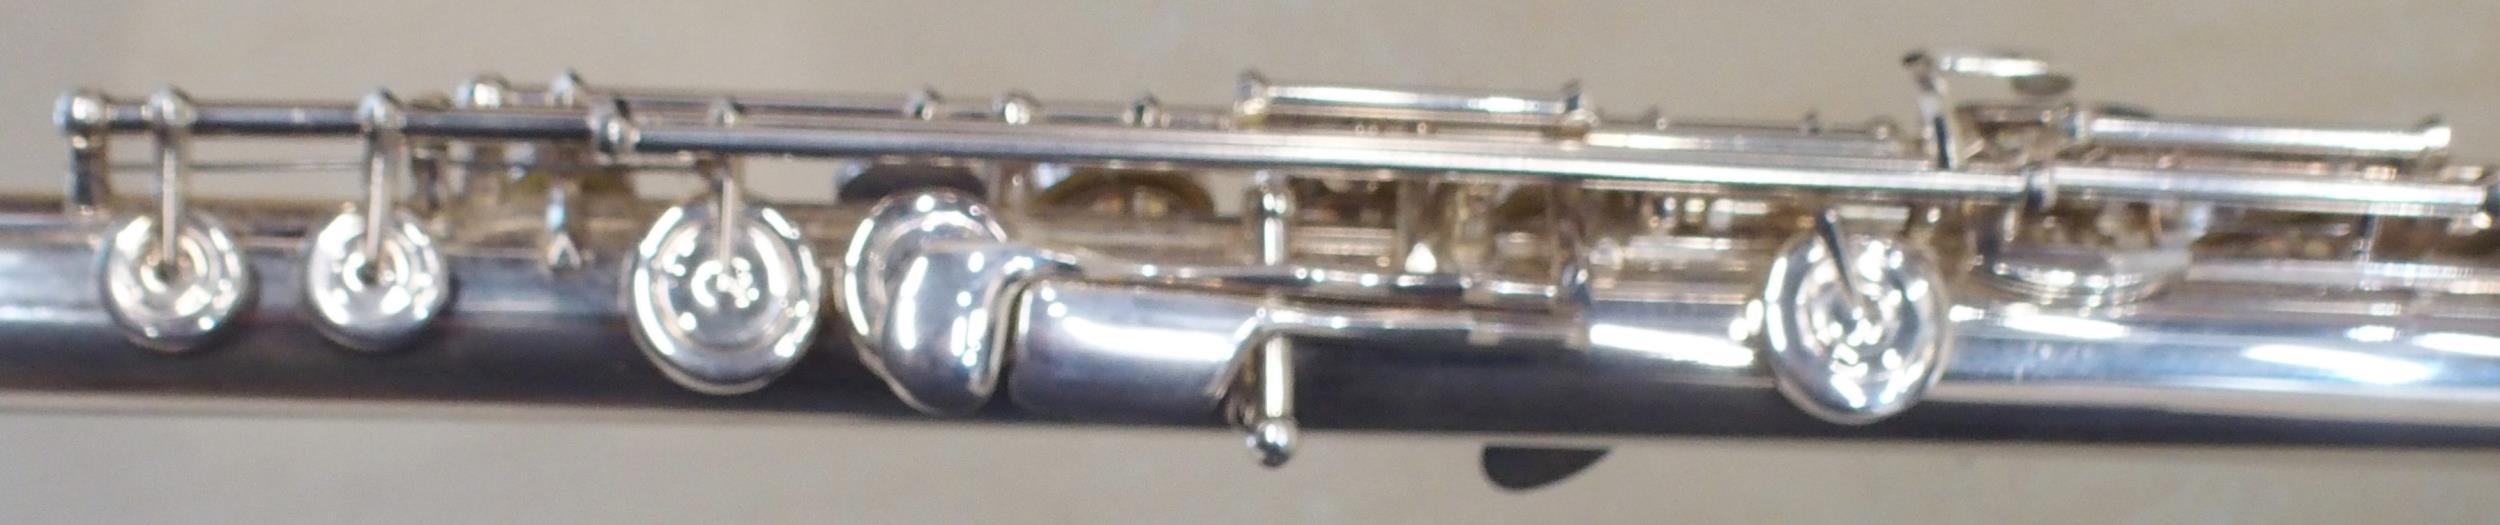 Pearl Quartz Flute Model PF-765 with gold lip-plate serial number A0066 with fitted case and Pearl - Image 6 of 8